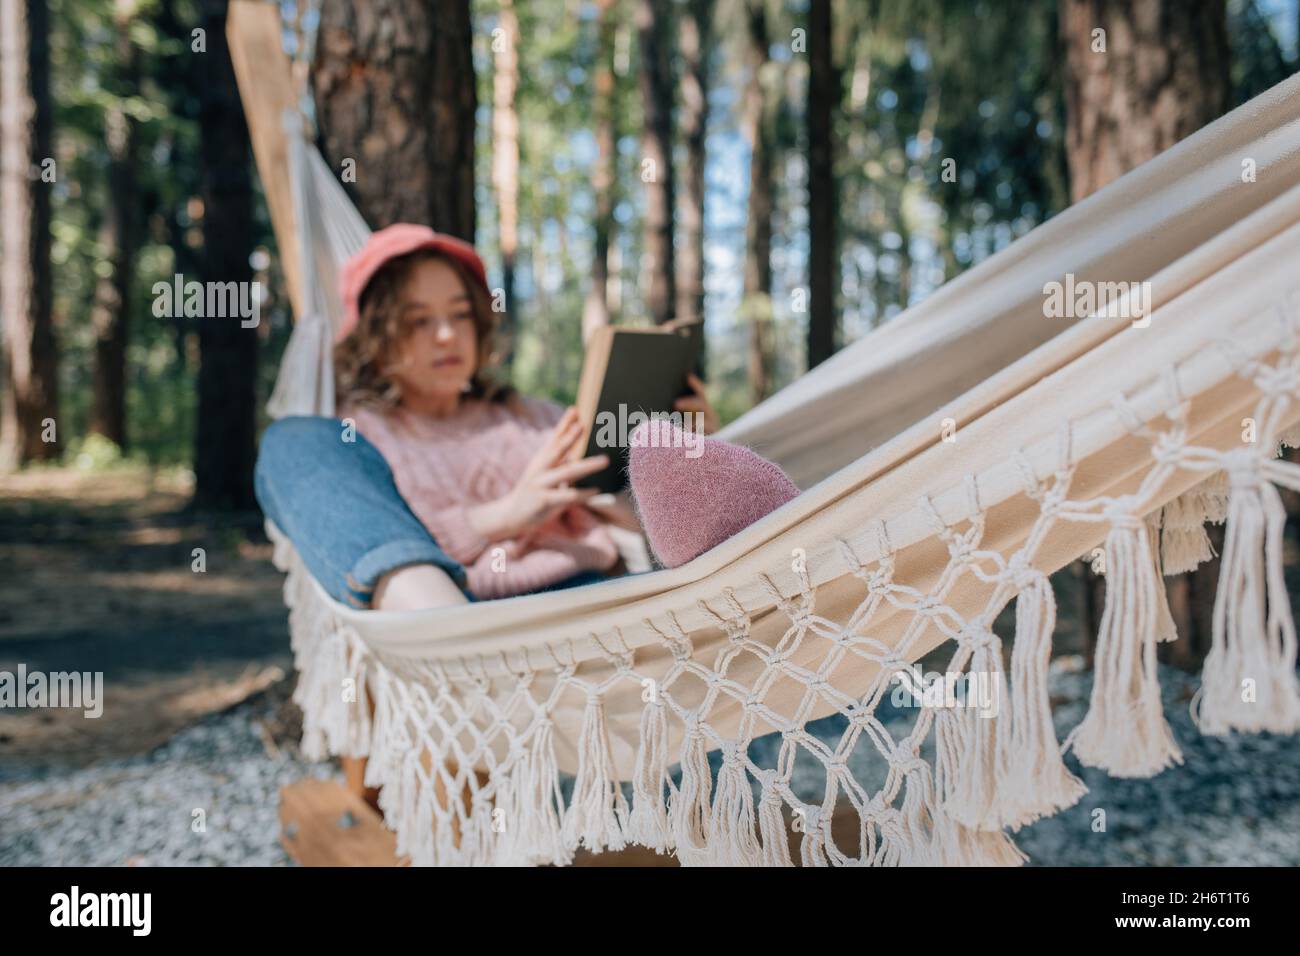 Woman in hammock reading book in forest, soft focus. Stock Photo